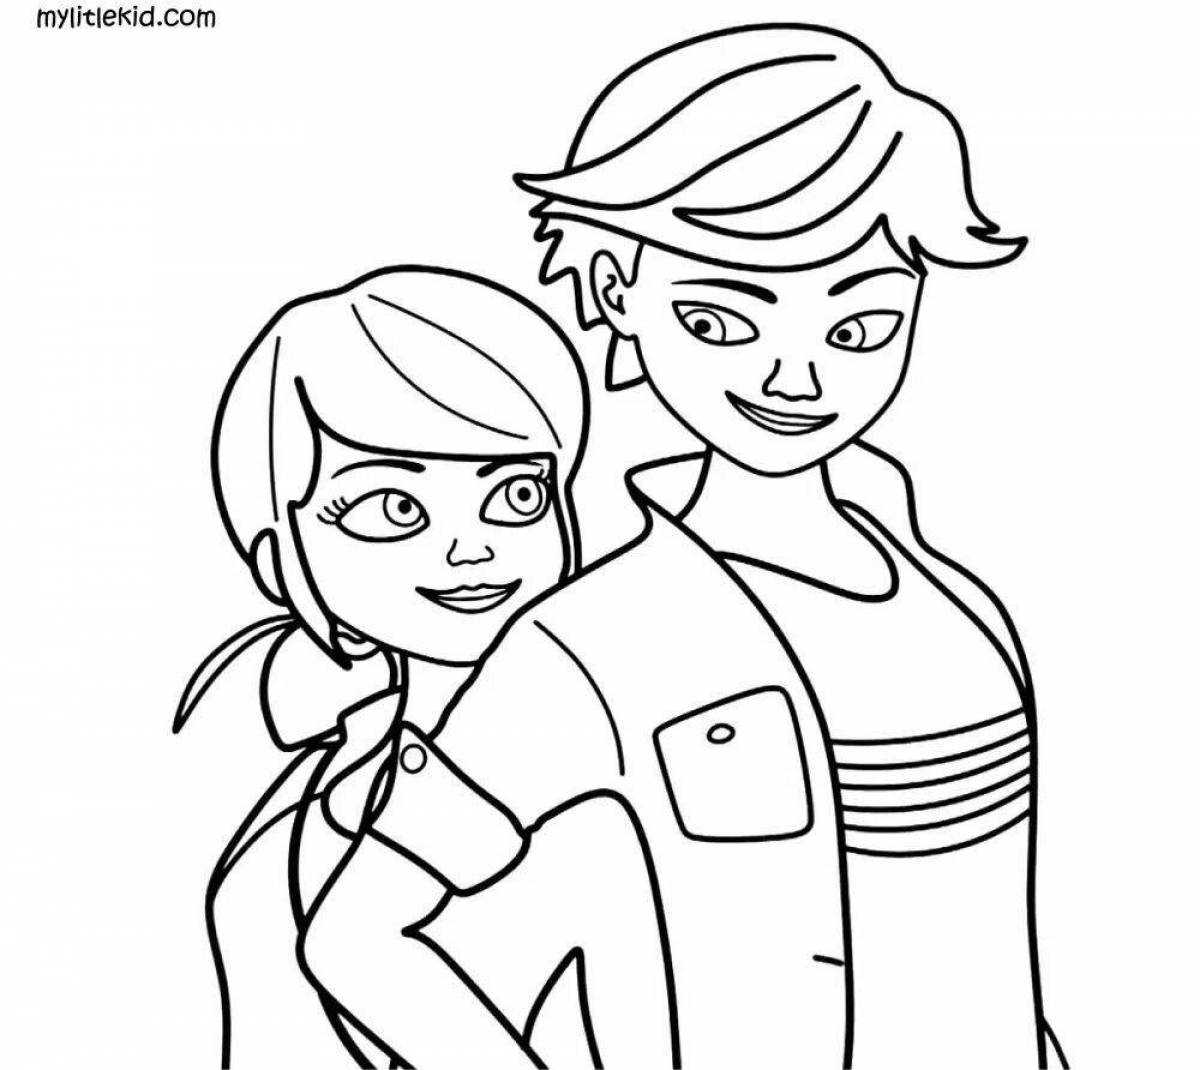 Animated marinette and adrien coloring book